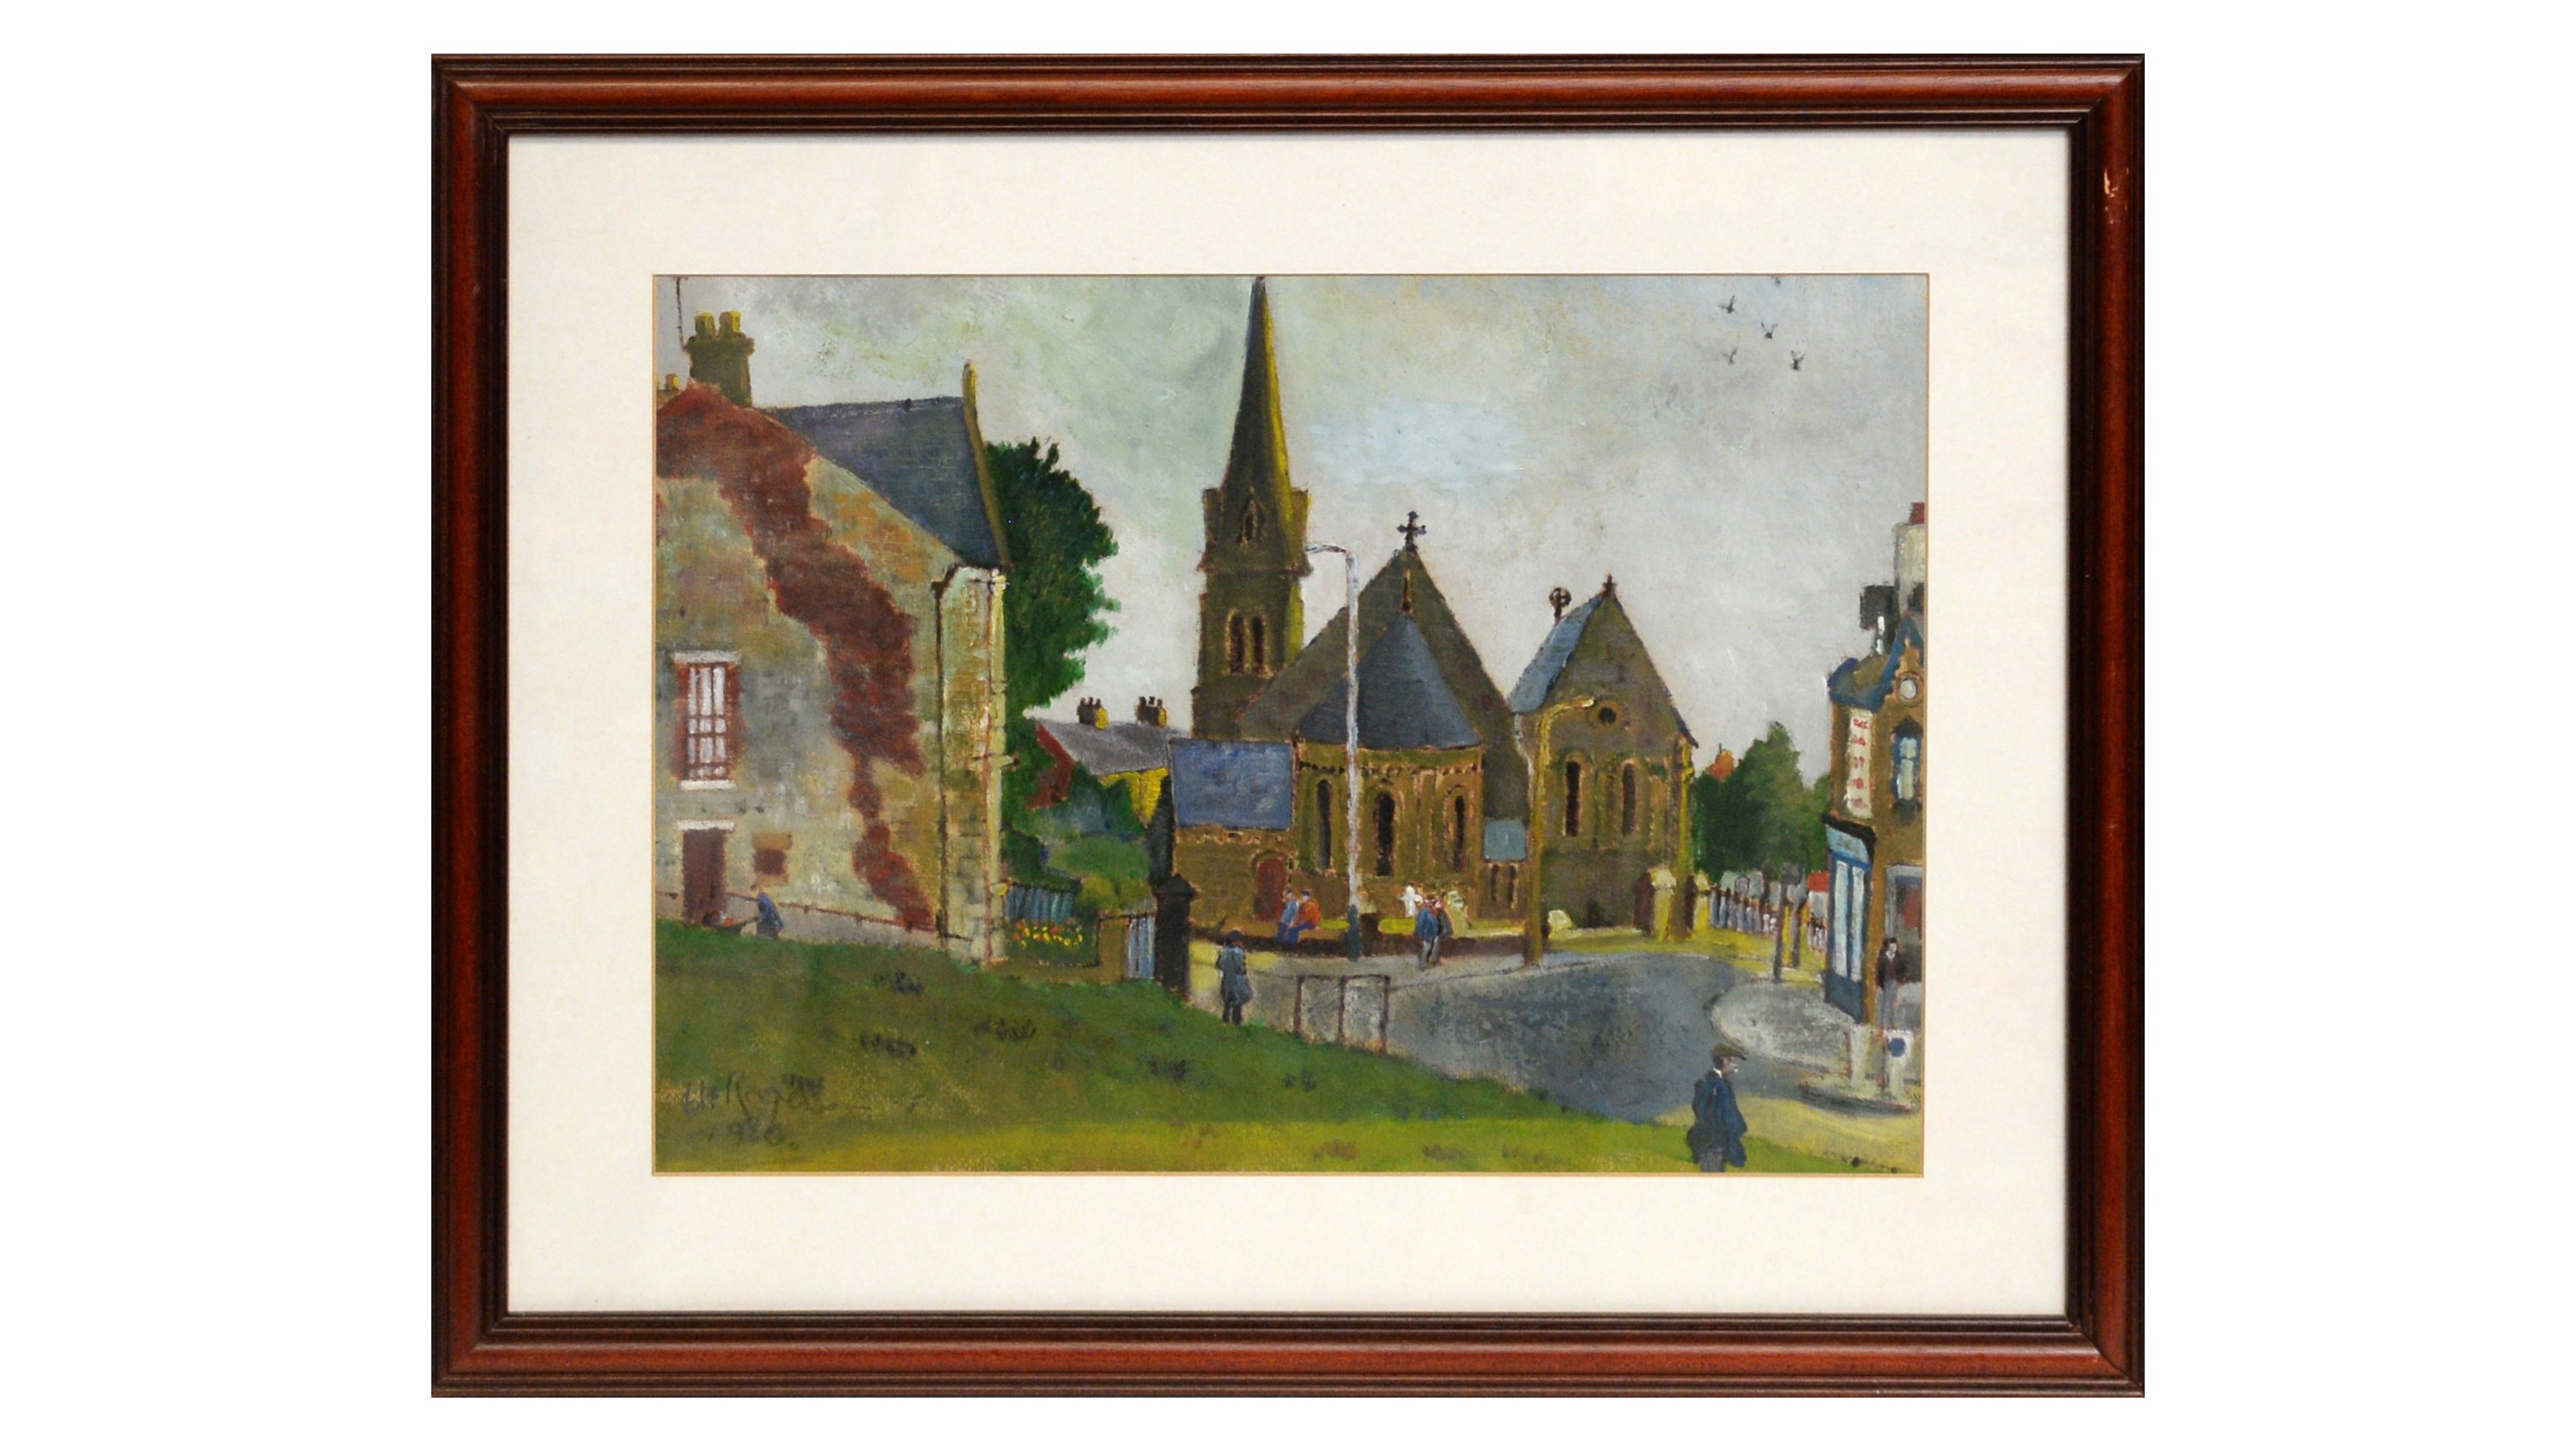 "St Cuthbert's Church, Gateshead in Summer", by Charles Herbert Rogers, dated 1980